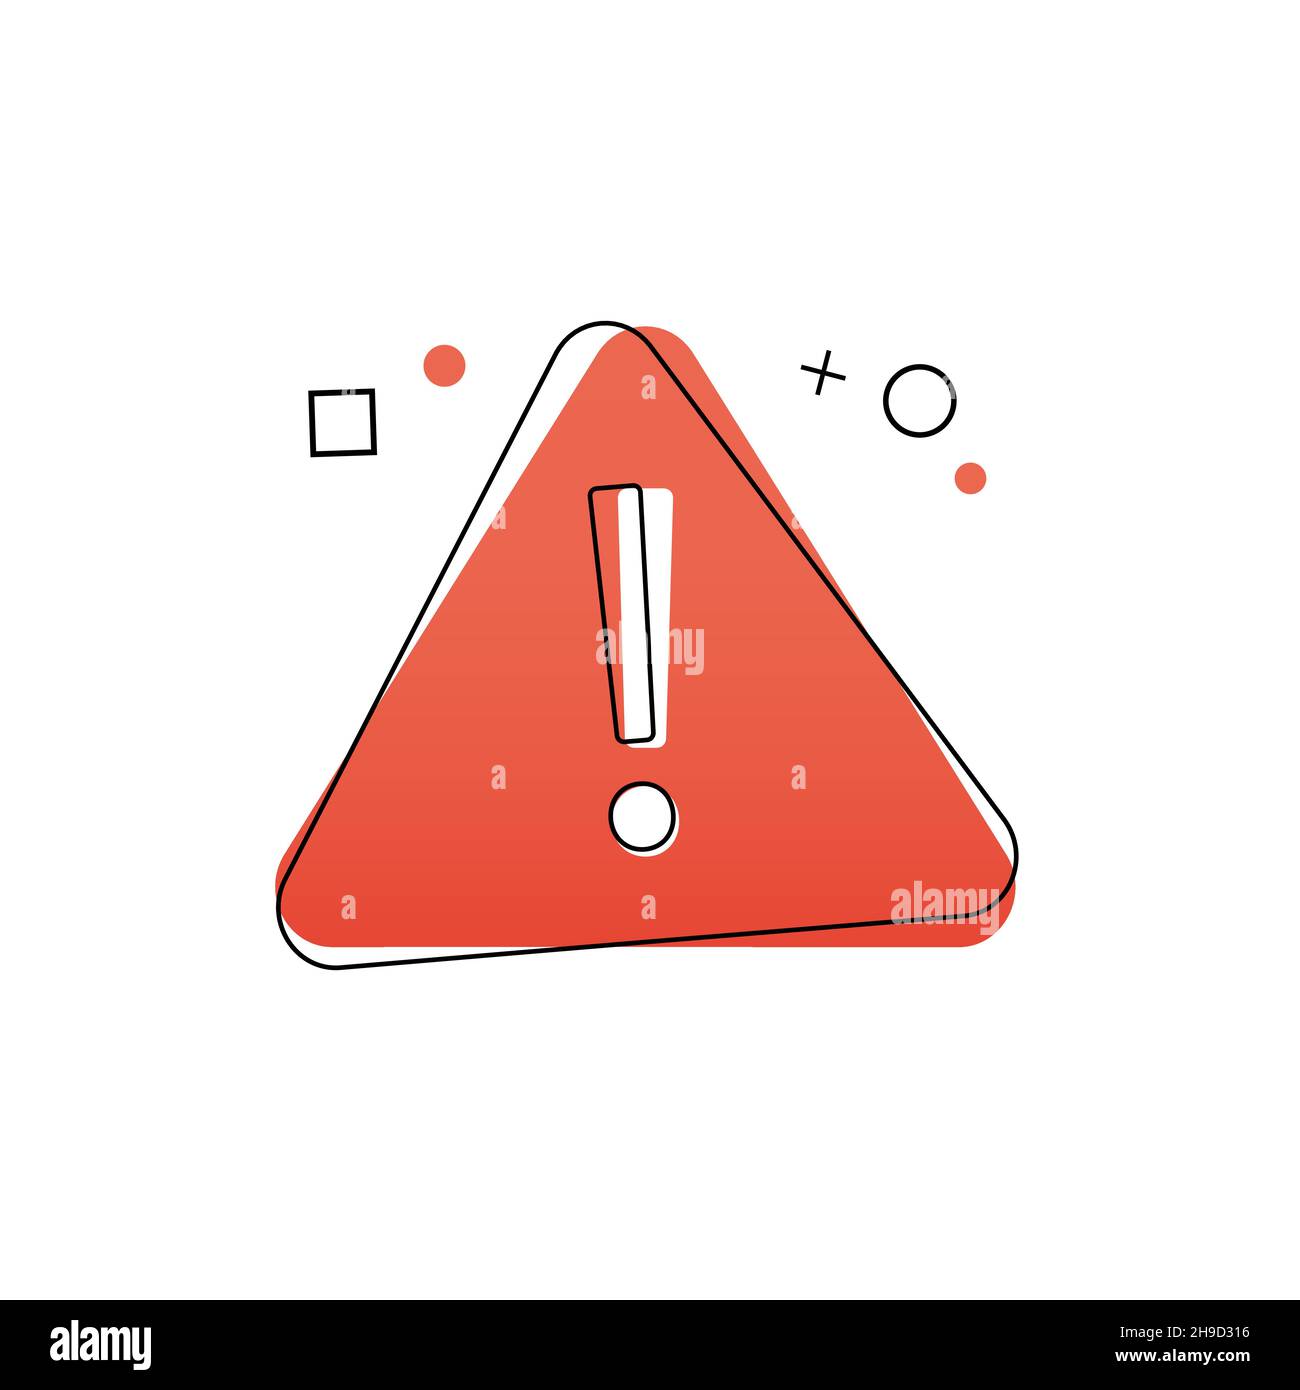 Caution alarm, danger sign collection. Attention icon with geometric shapes on white background. Red fatal error message element. Exclamation mark of Stock Vector